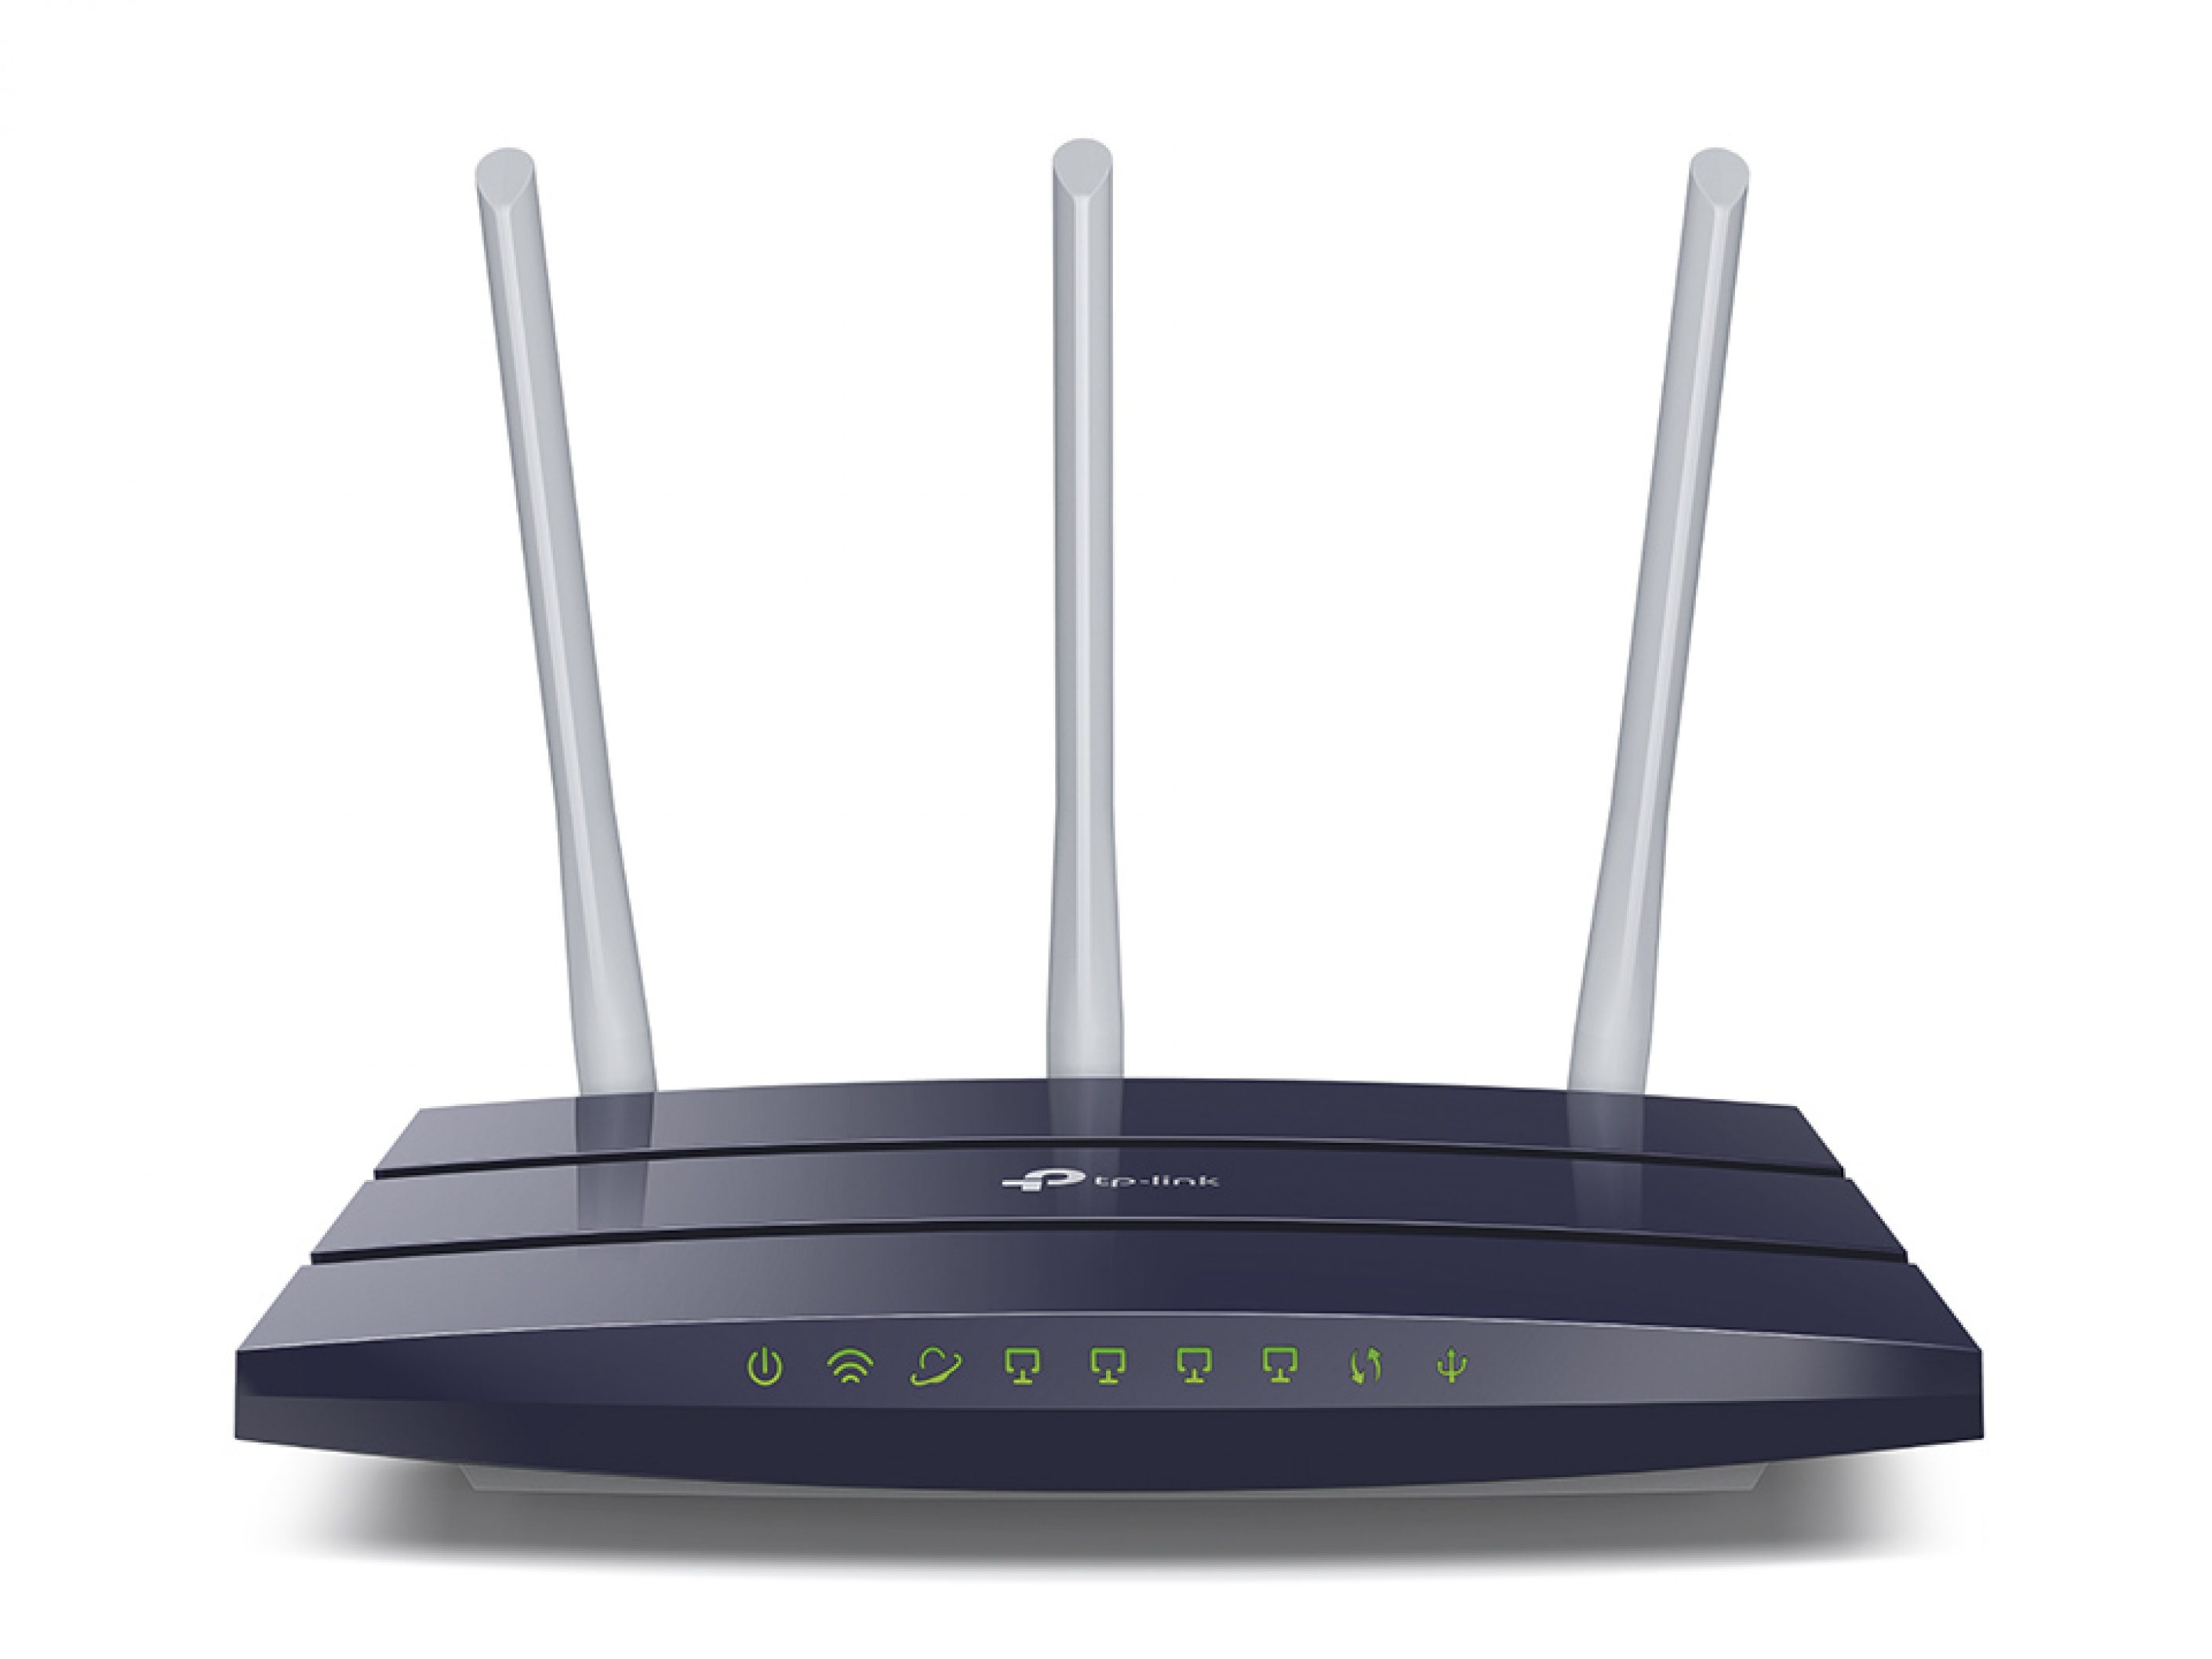 Can withstand To Nine Adaptive Router Gigabit Wireless N 450Mbps 3 antene, TP-LINK TL-WR1043N